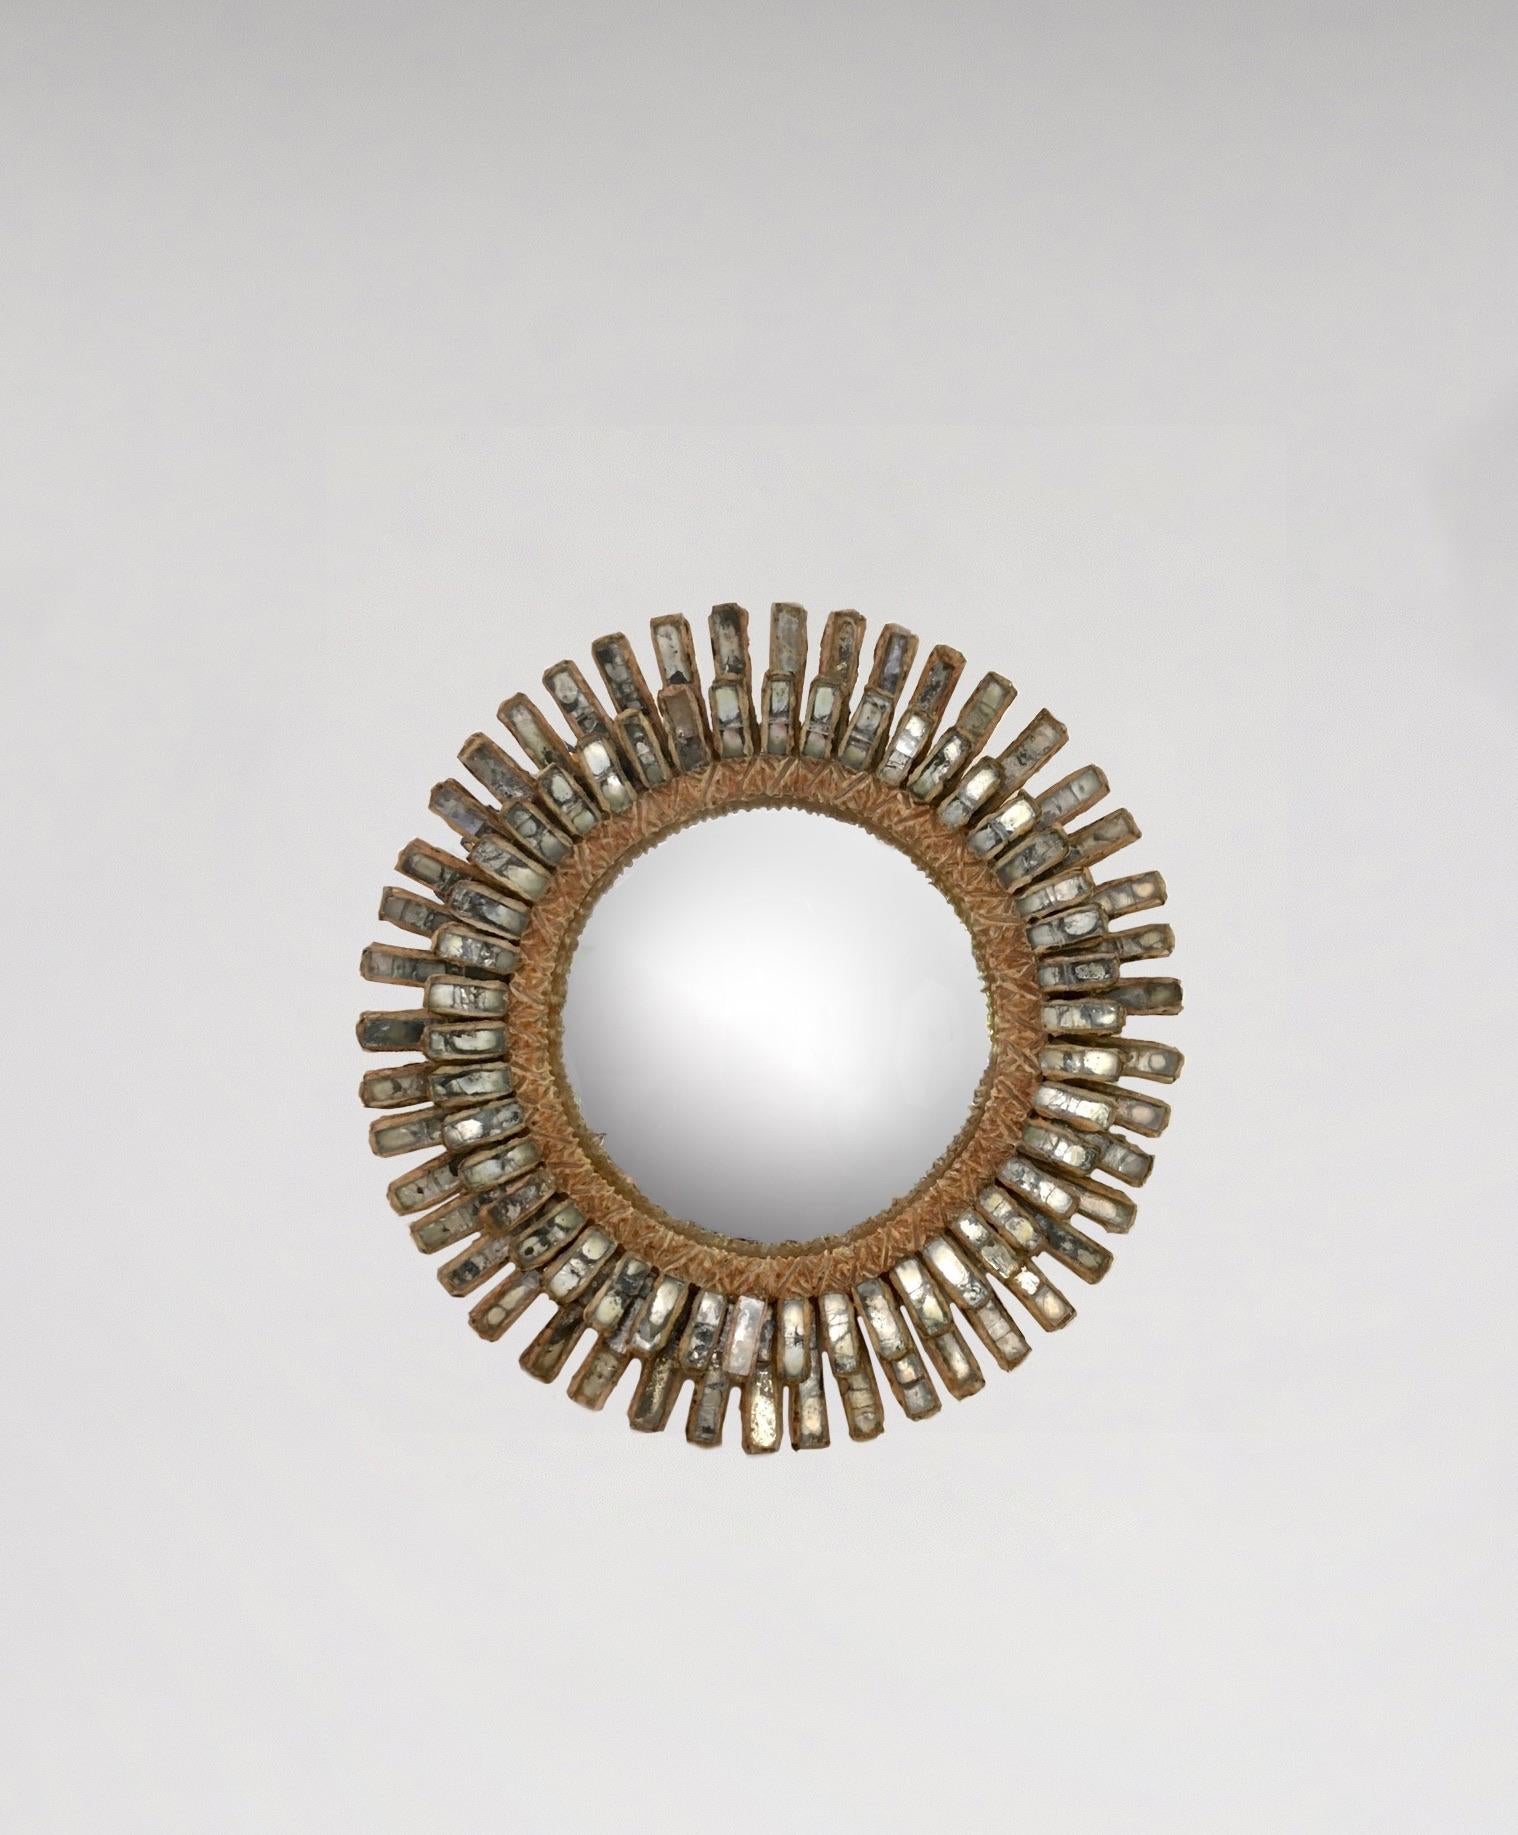 Mirror in talosel resin, mirror fragments and glass.
Incised to verso LINE VAUTRIN.
Diameter: 20.3 cm (8 in).